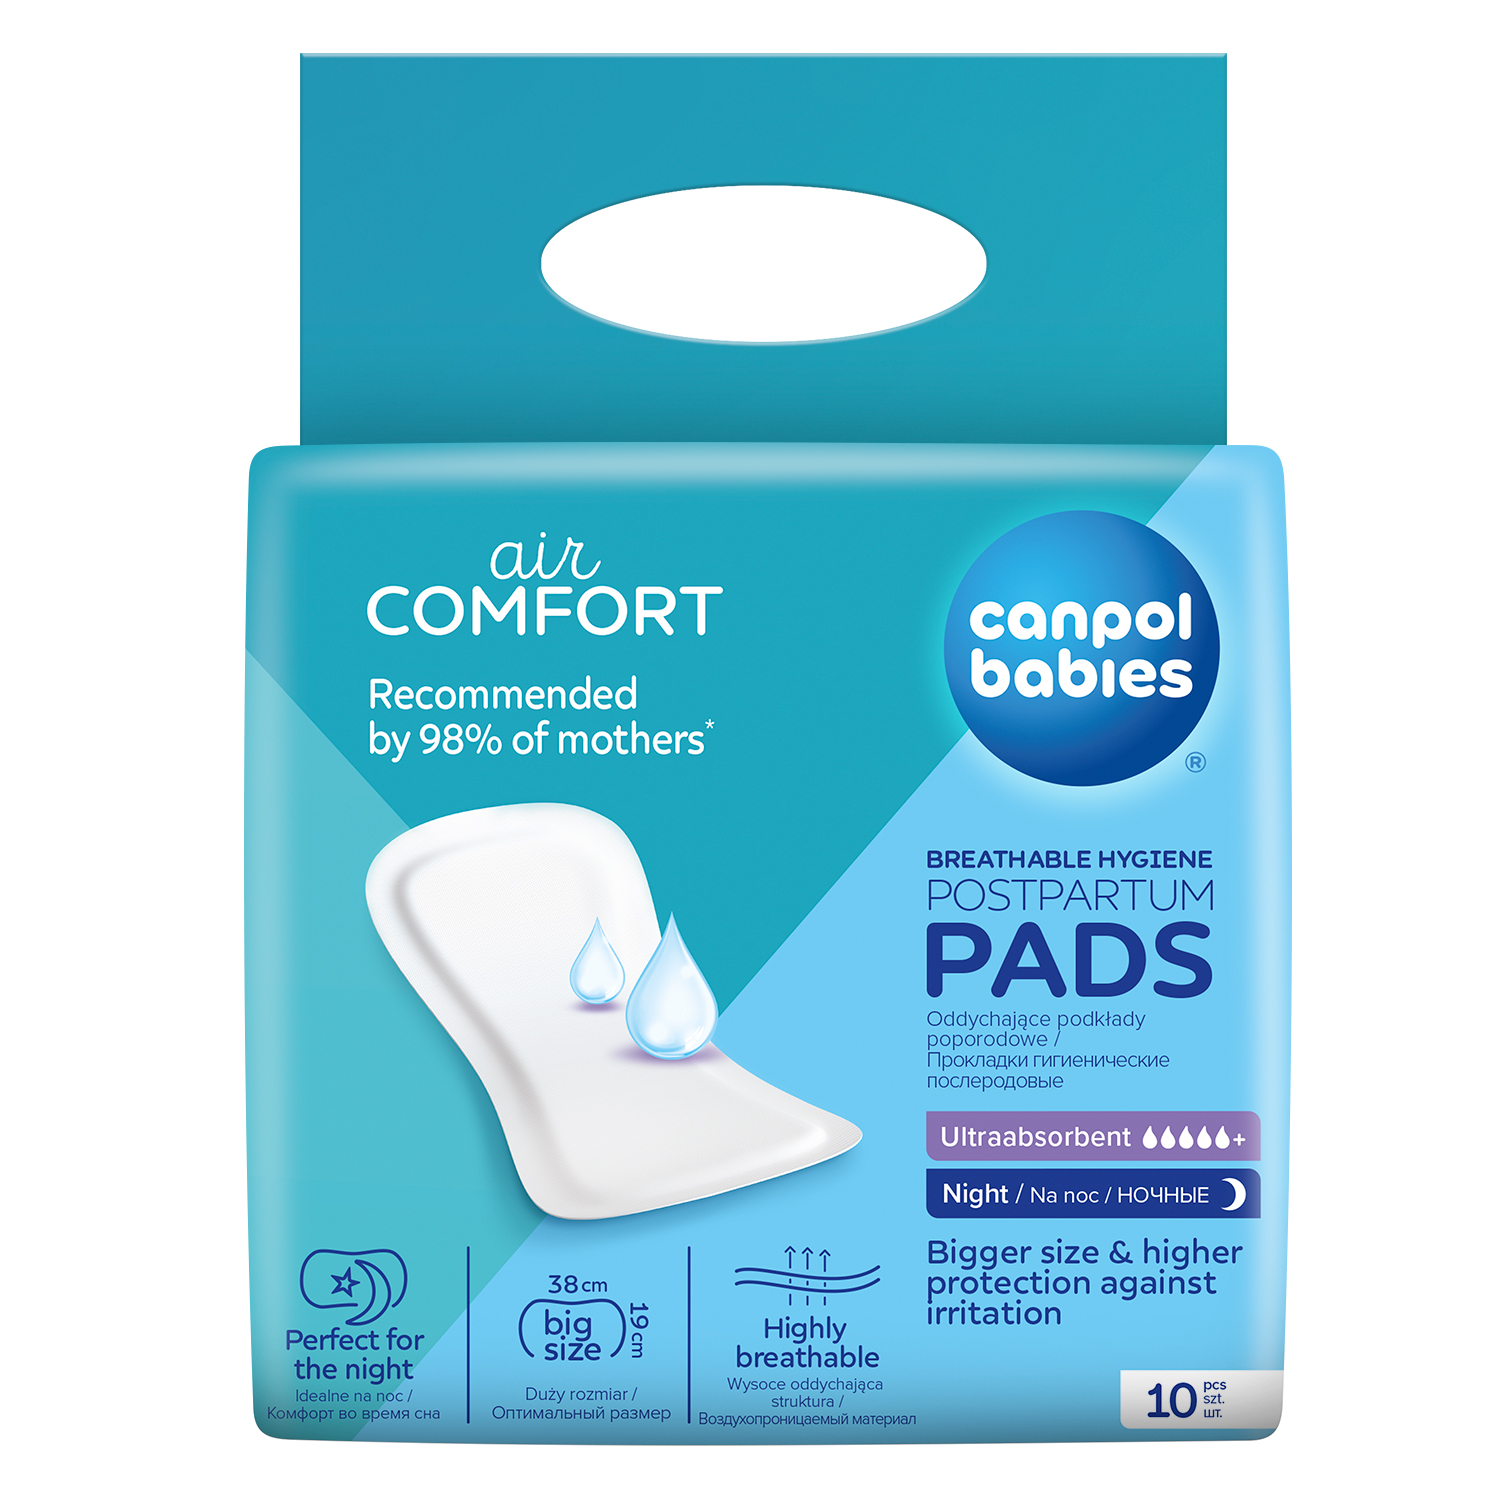 https://canpolbabies.com/eCatalog/canpol/pregnancy-and-childbirth/postpartum-and-hygiene-pads/78-001/78_001-pack-front.jpg